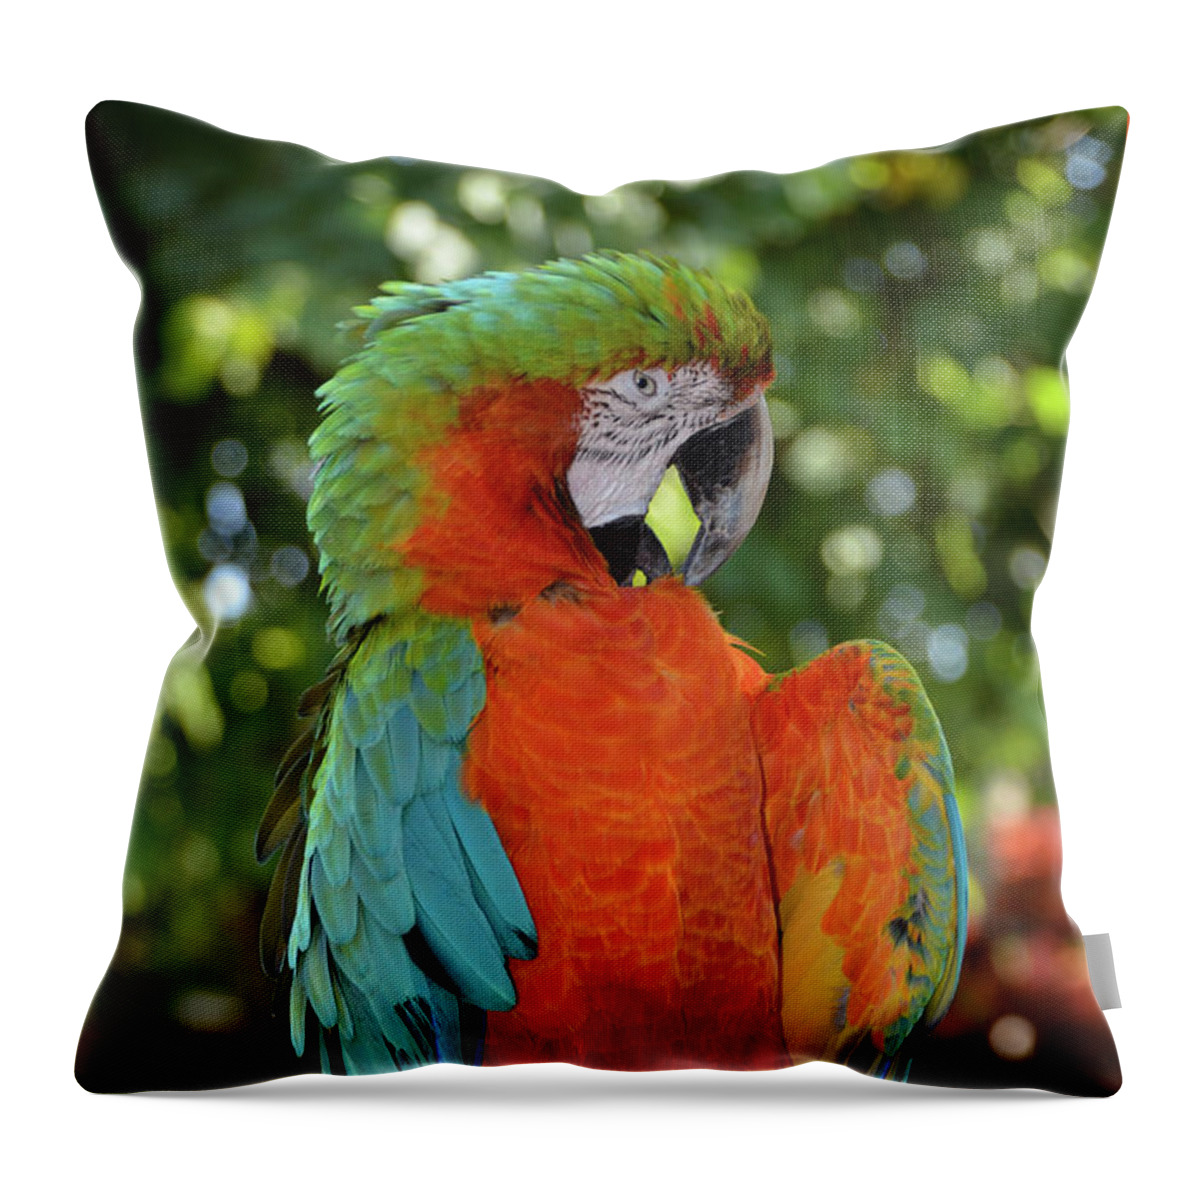 Macaw Throw Pillow featuring the photograph Colorful Macaw with Wings Spread by Artful Imagery